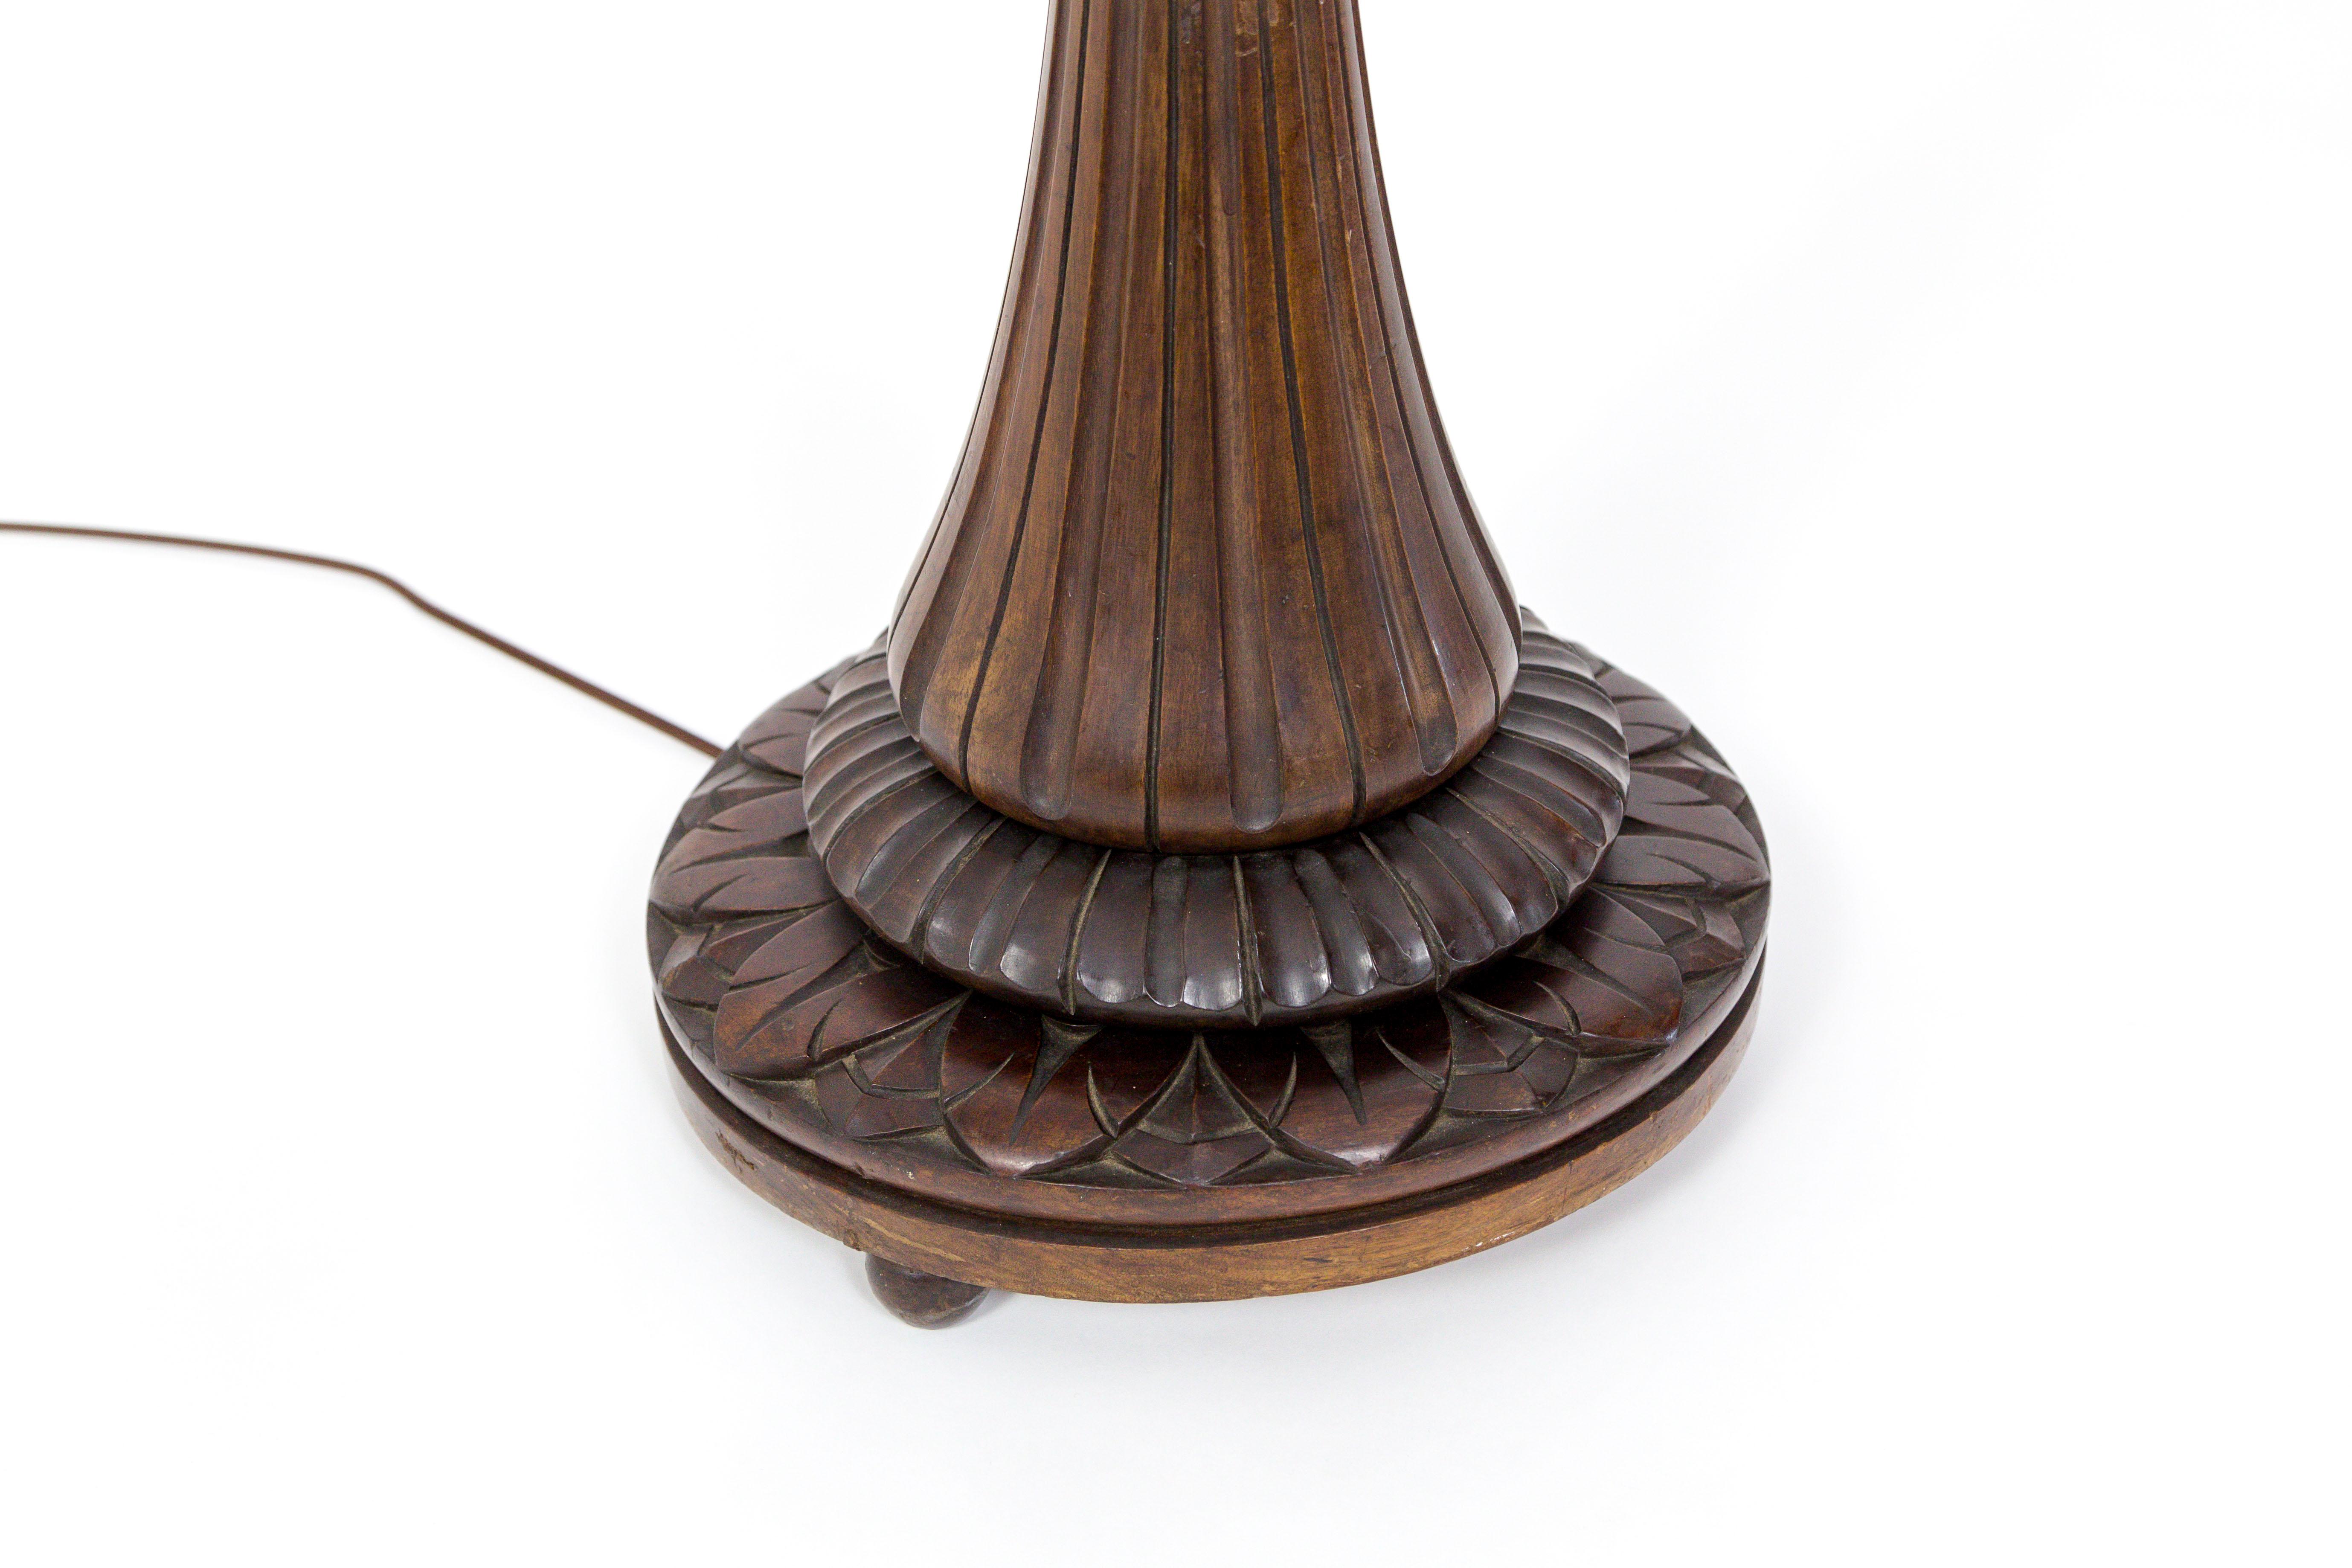 A beautiful carved, monumental, fluted, mahogany floor lamp, with leaf details at the base and gadrooned and floral accents on the stem. With three, disk shaped feet, and brown, fabric covered cord. Arts and Crafts movement; England, circa 1920s.